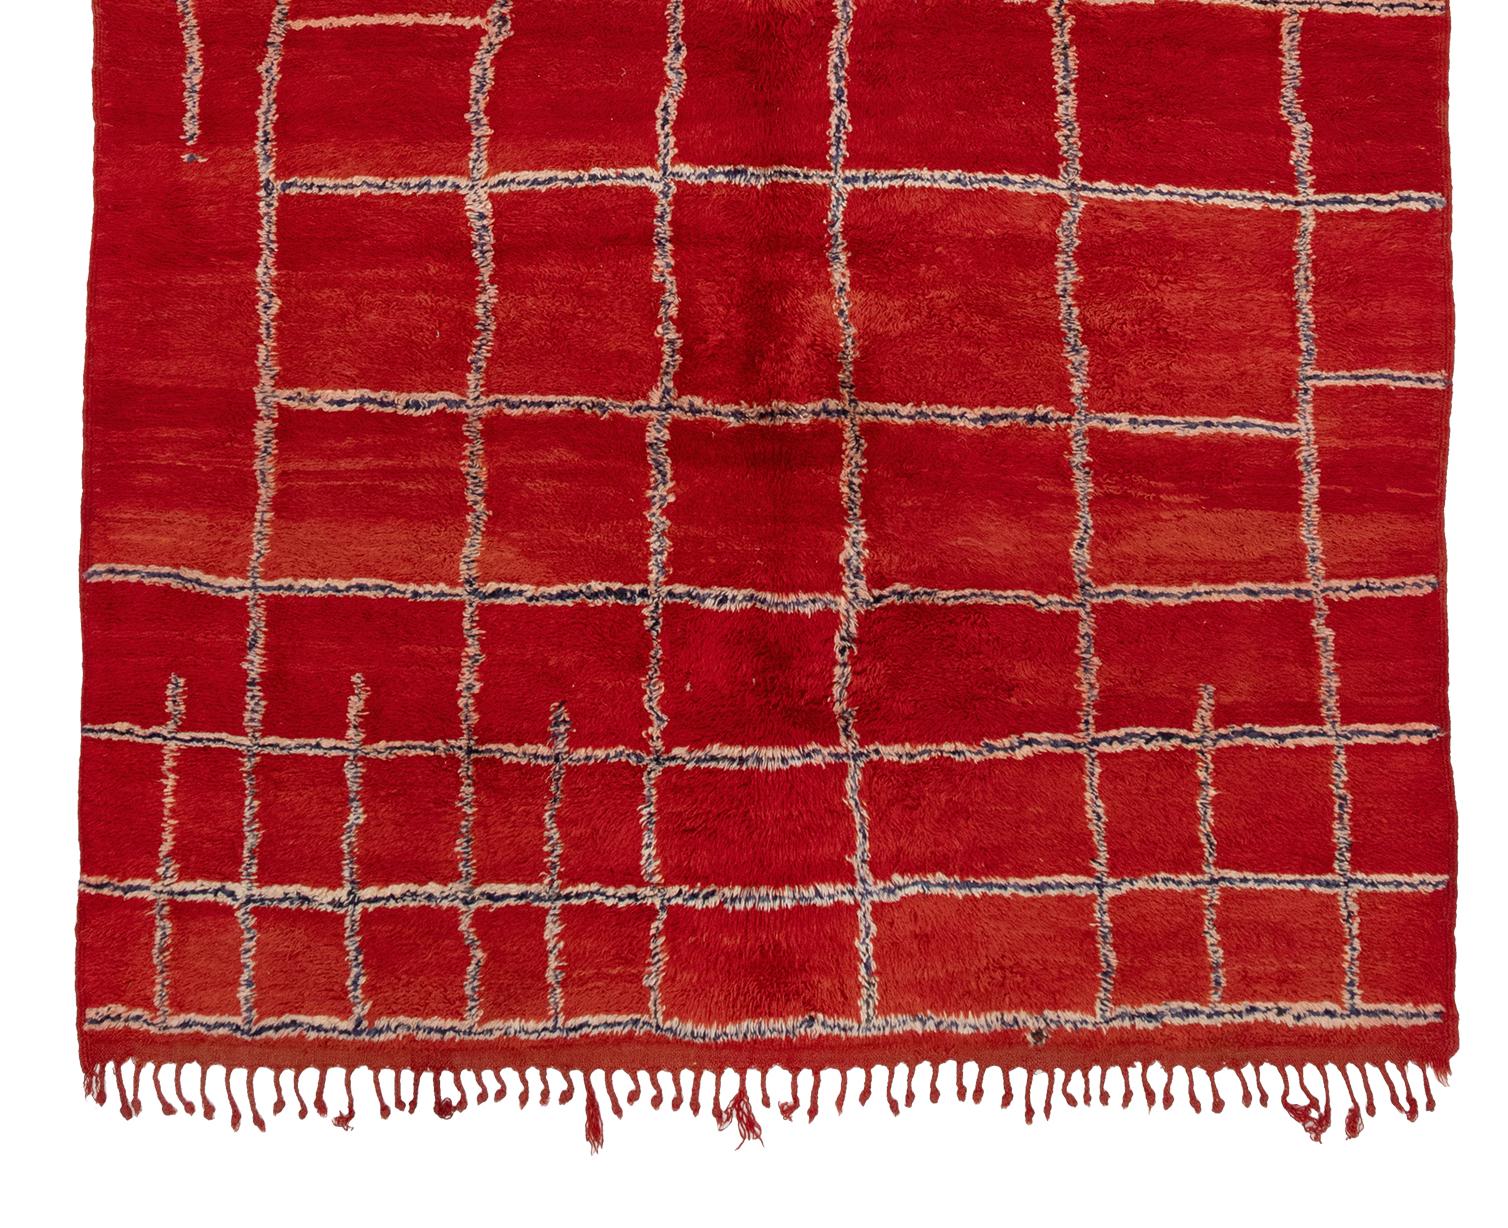 Vibrant Red Moroccan Rug In Excellent Condition For Sale In Los Angeles, CA